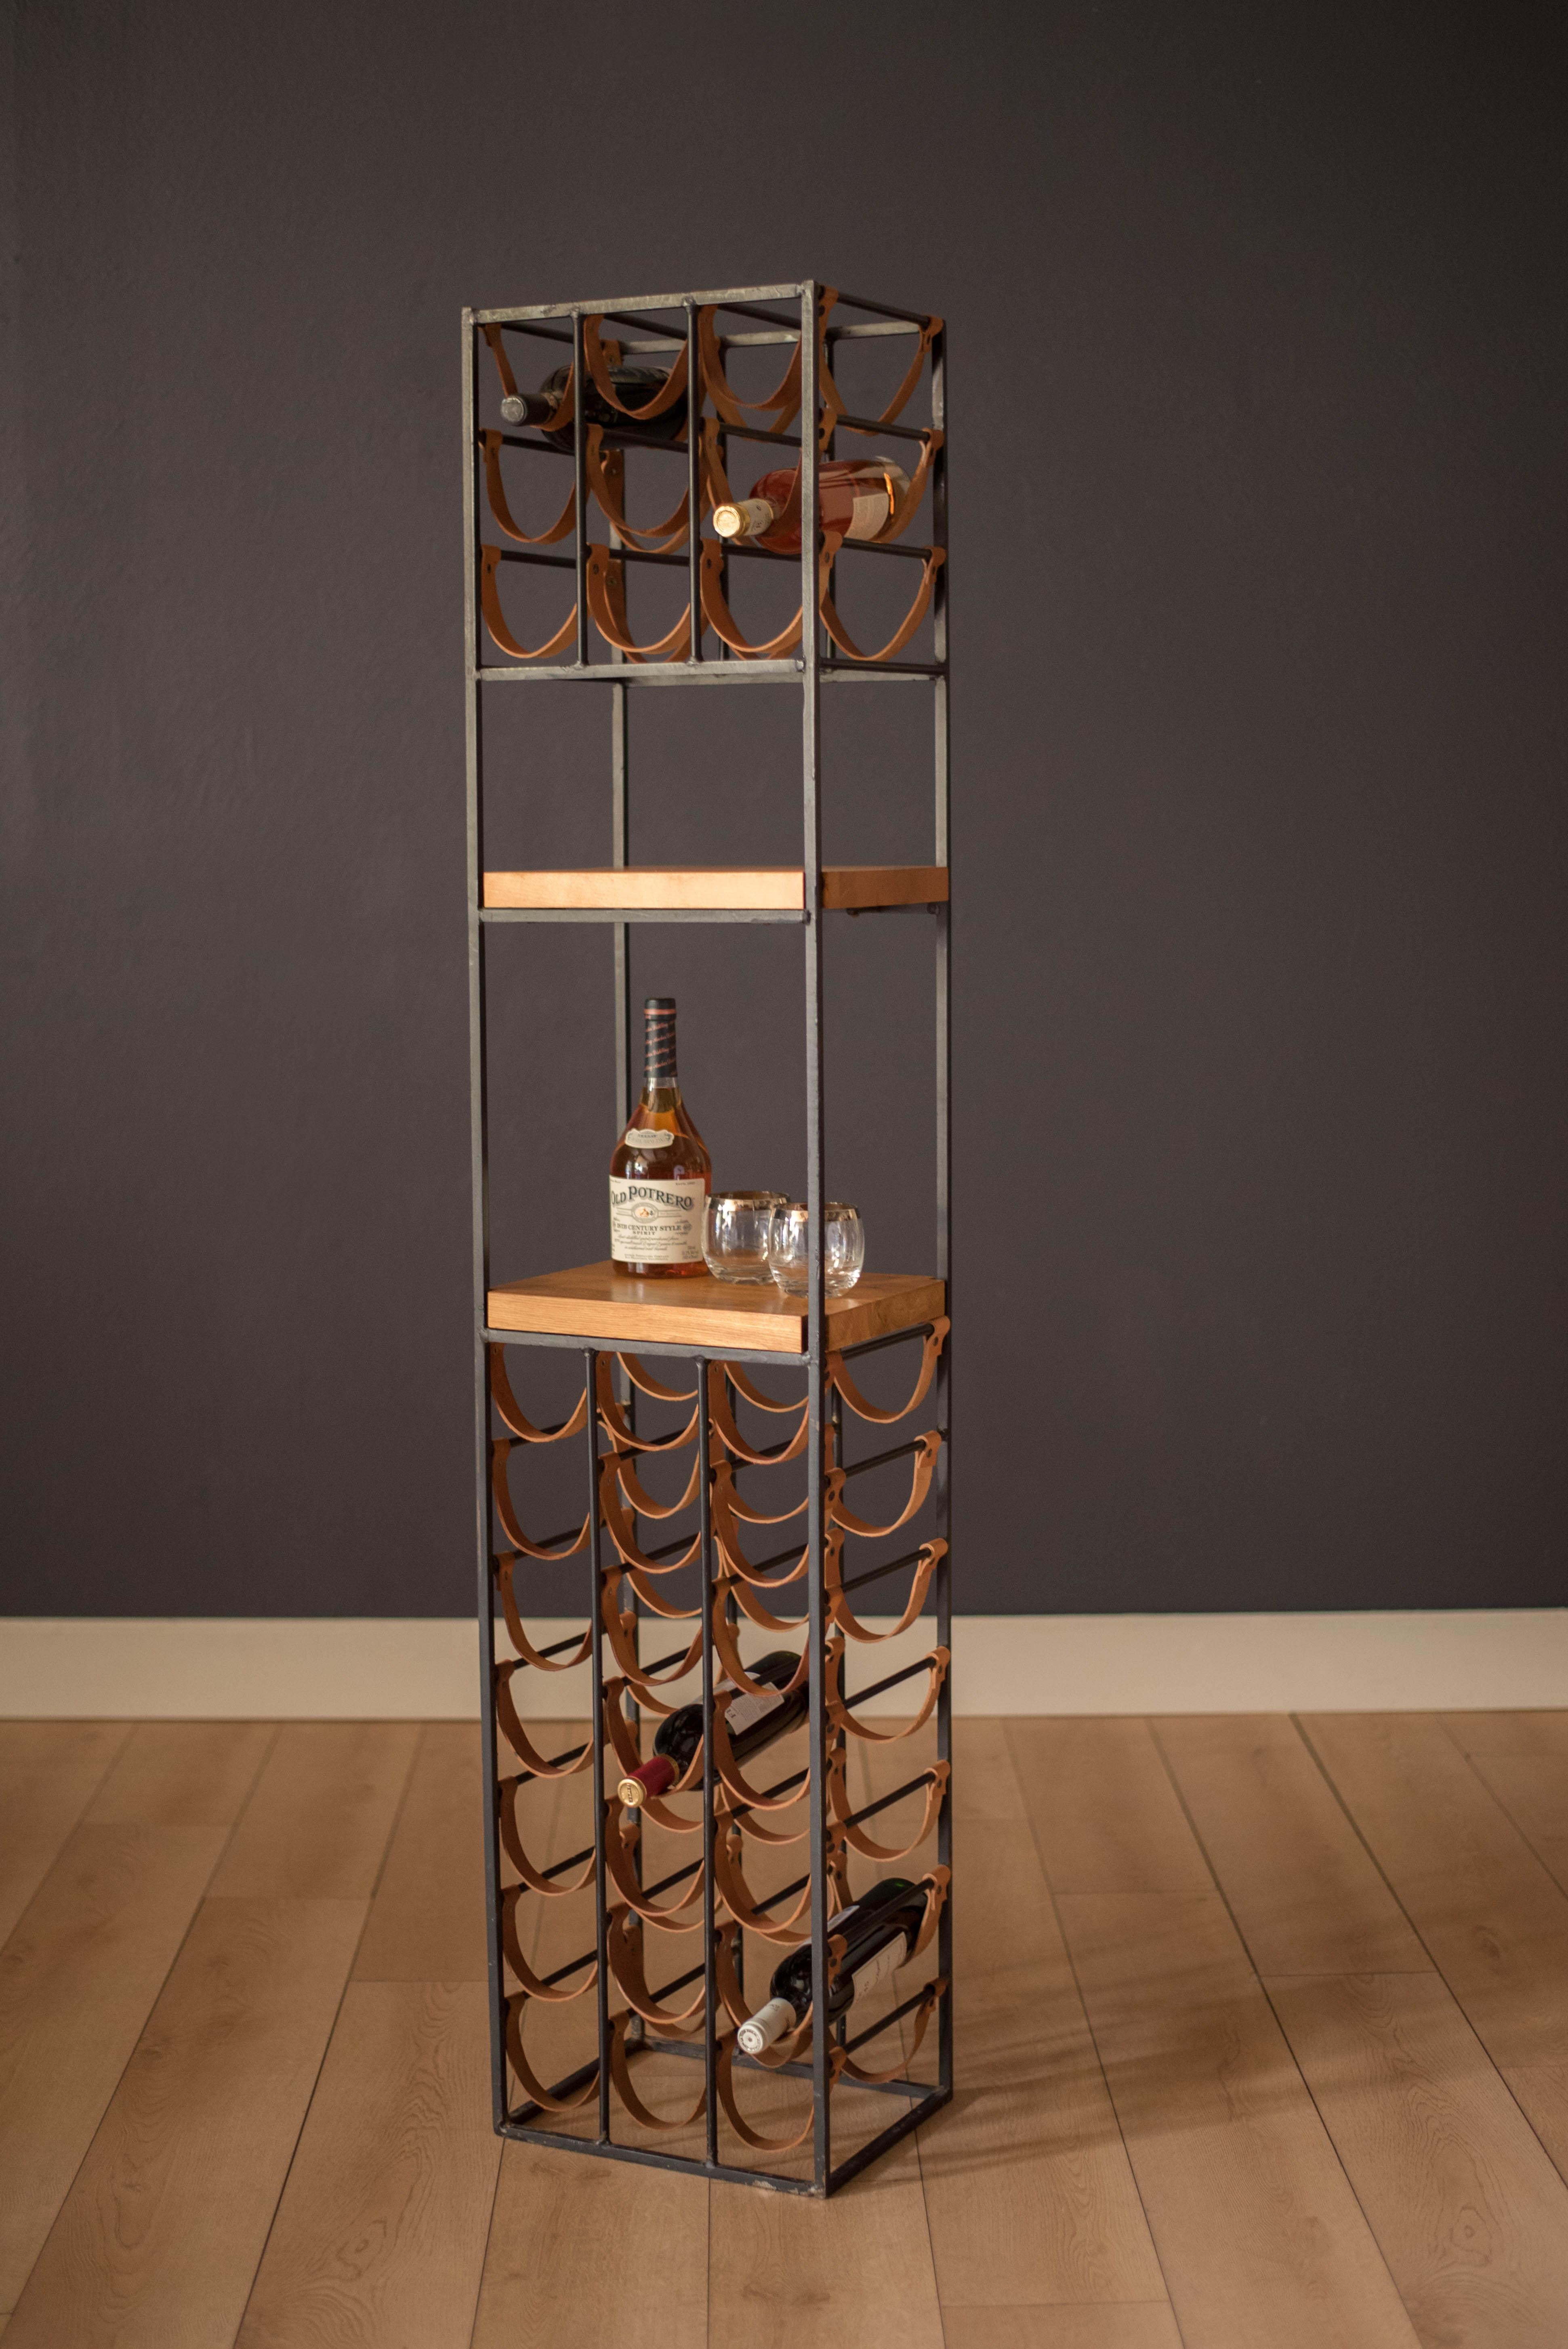 Vintage tall wine rack designed by Arthur Umanoff for Shaver Howard, circa 1950s. This piece is constructed of heavy cast black iron and tan leather saddle straps that hold up to 30 bottles. Features two butcher block shelves for cocktail serving or